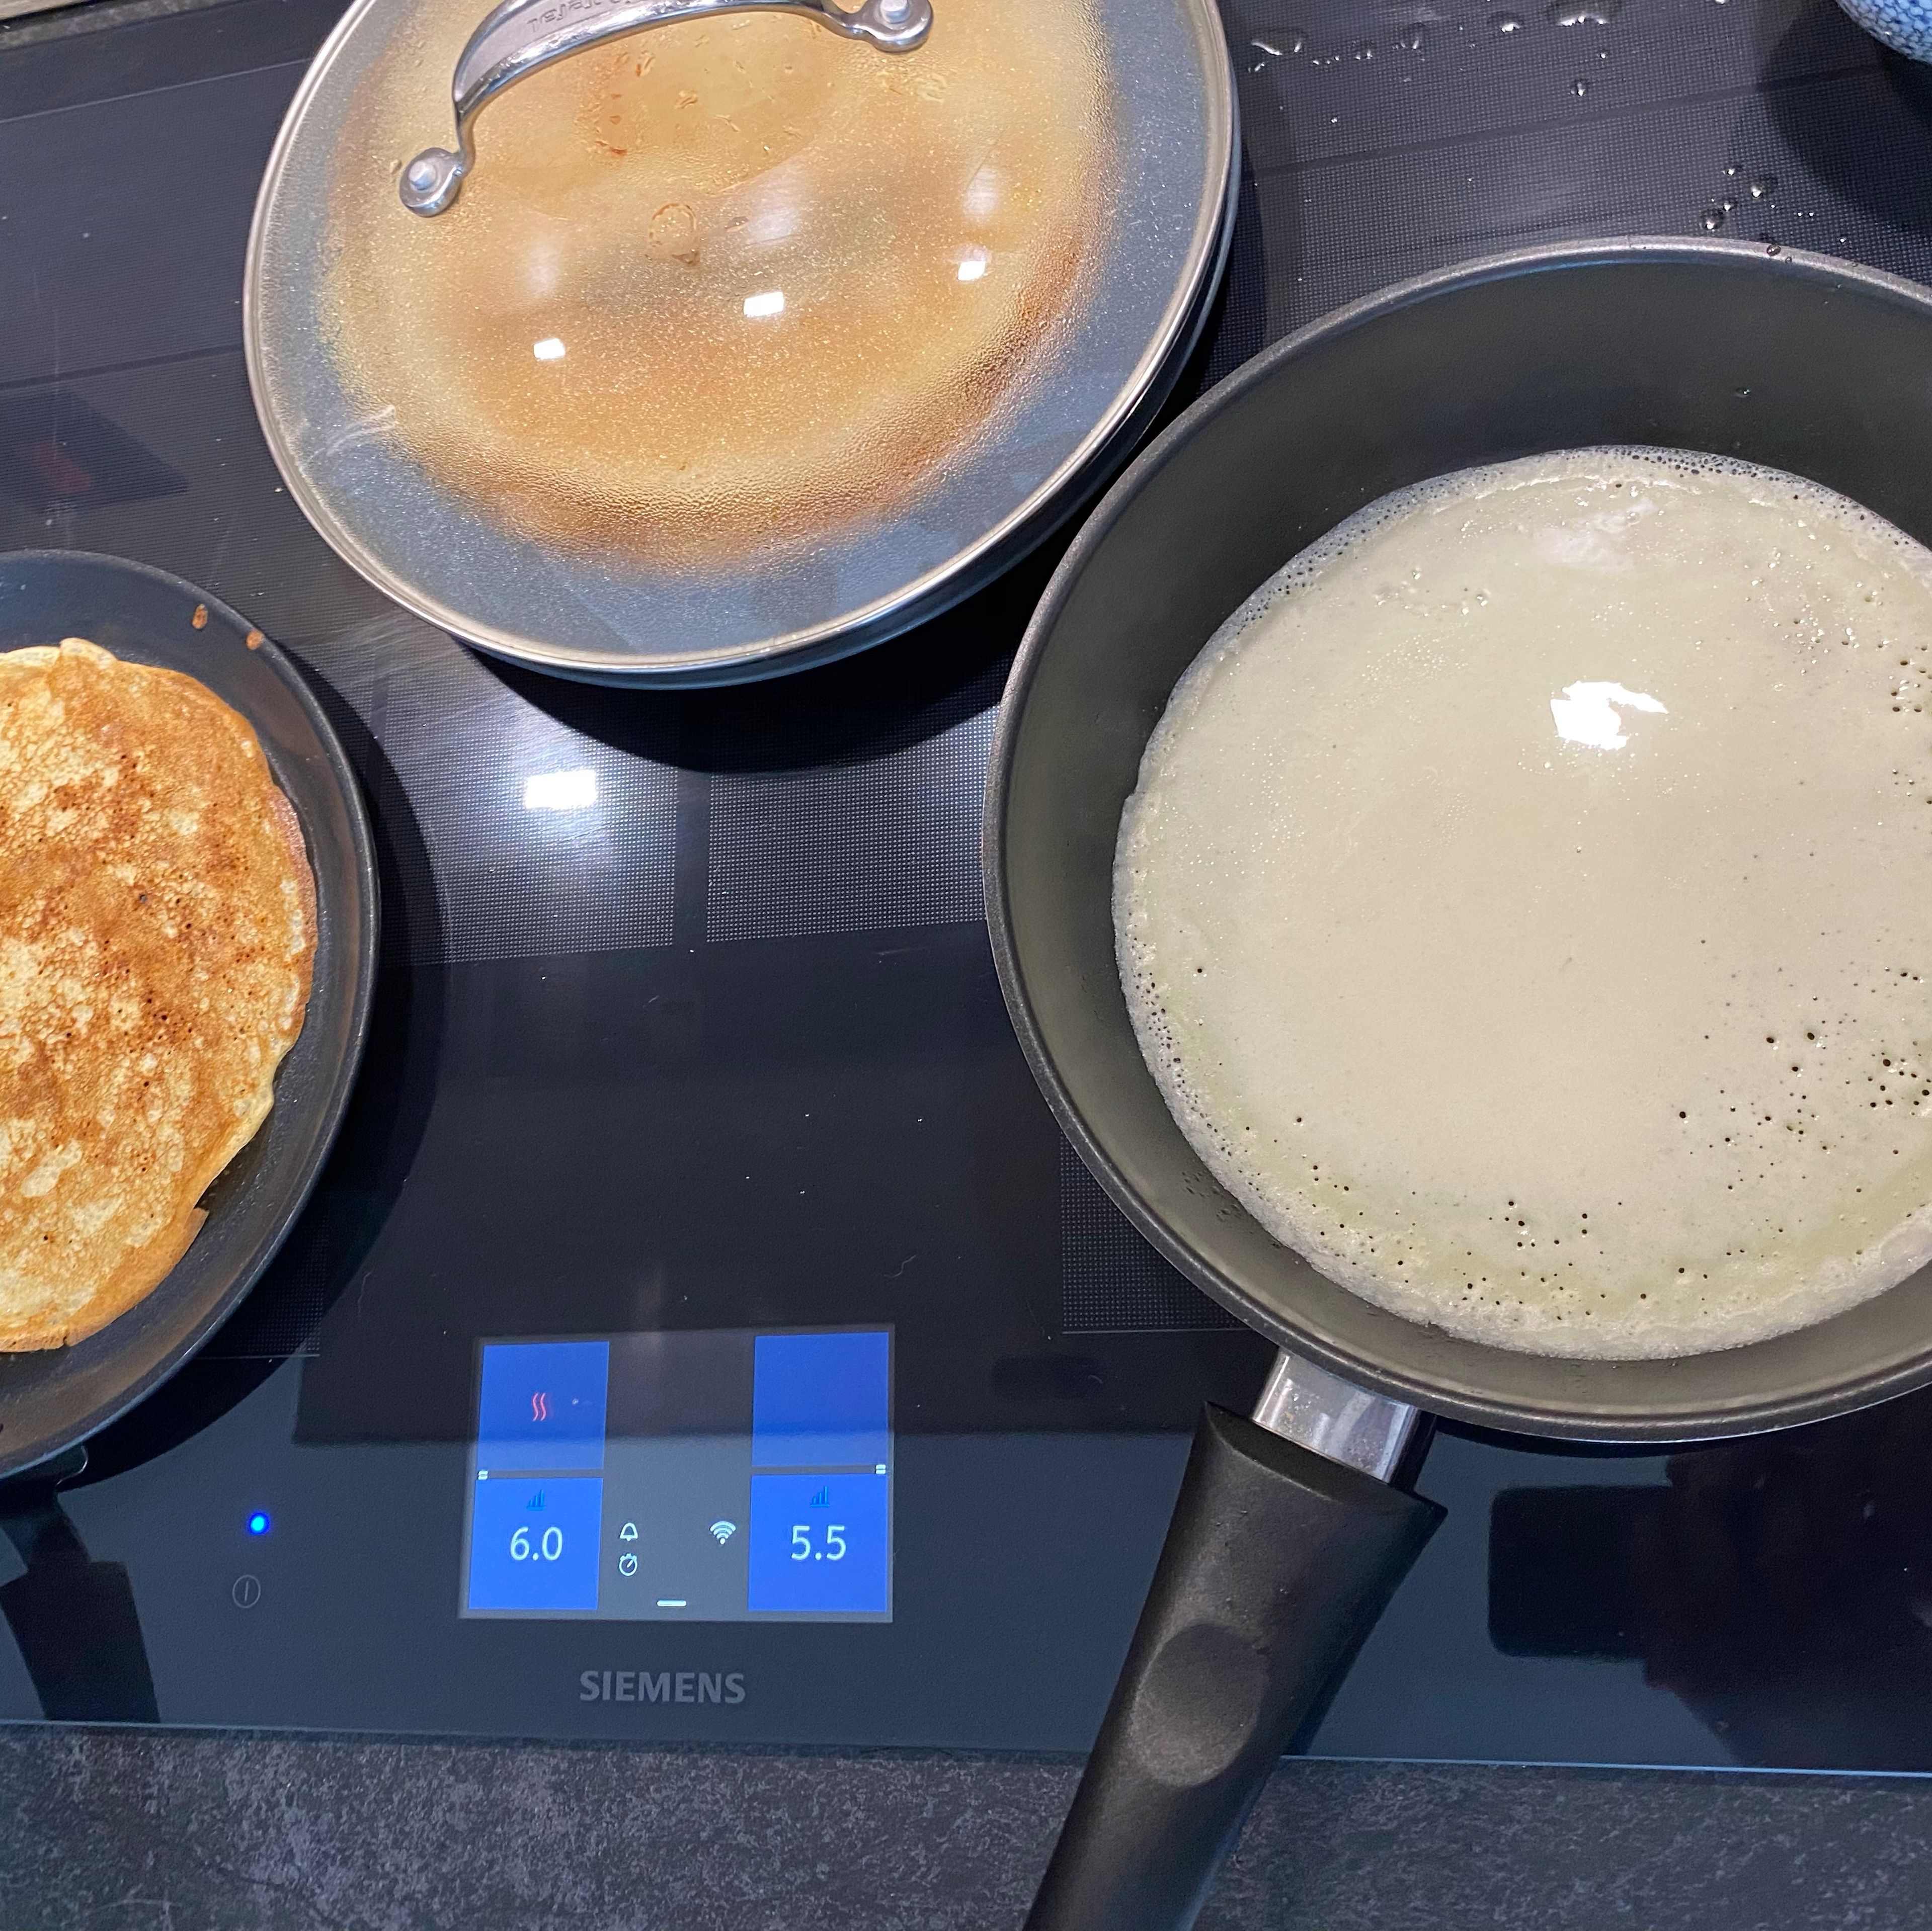 Fry pancakes using mid-high level on hob right after all ingredients mixed. Use minimum amount of butter on the frying pen (using brush). Fry each side for about 1-2mins.